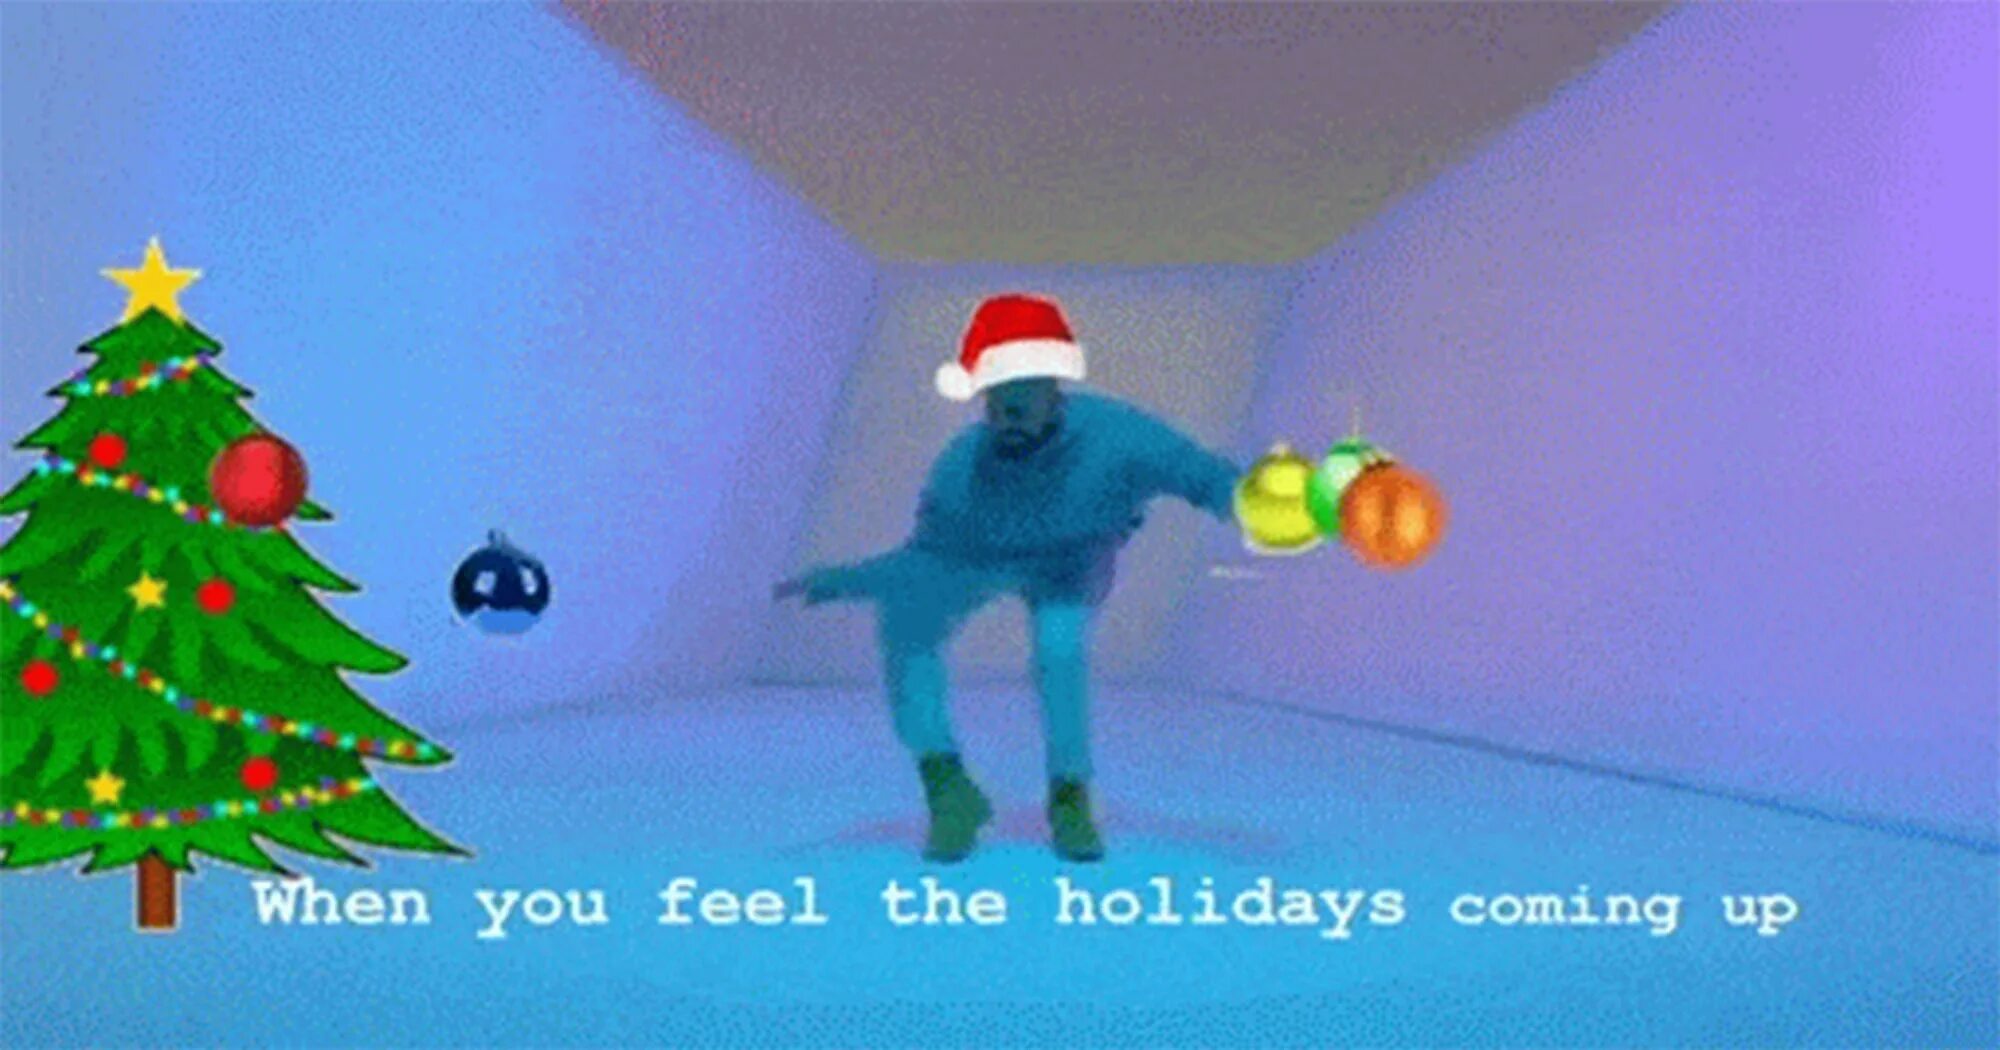 When the holidays come